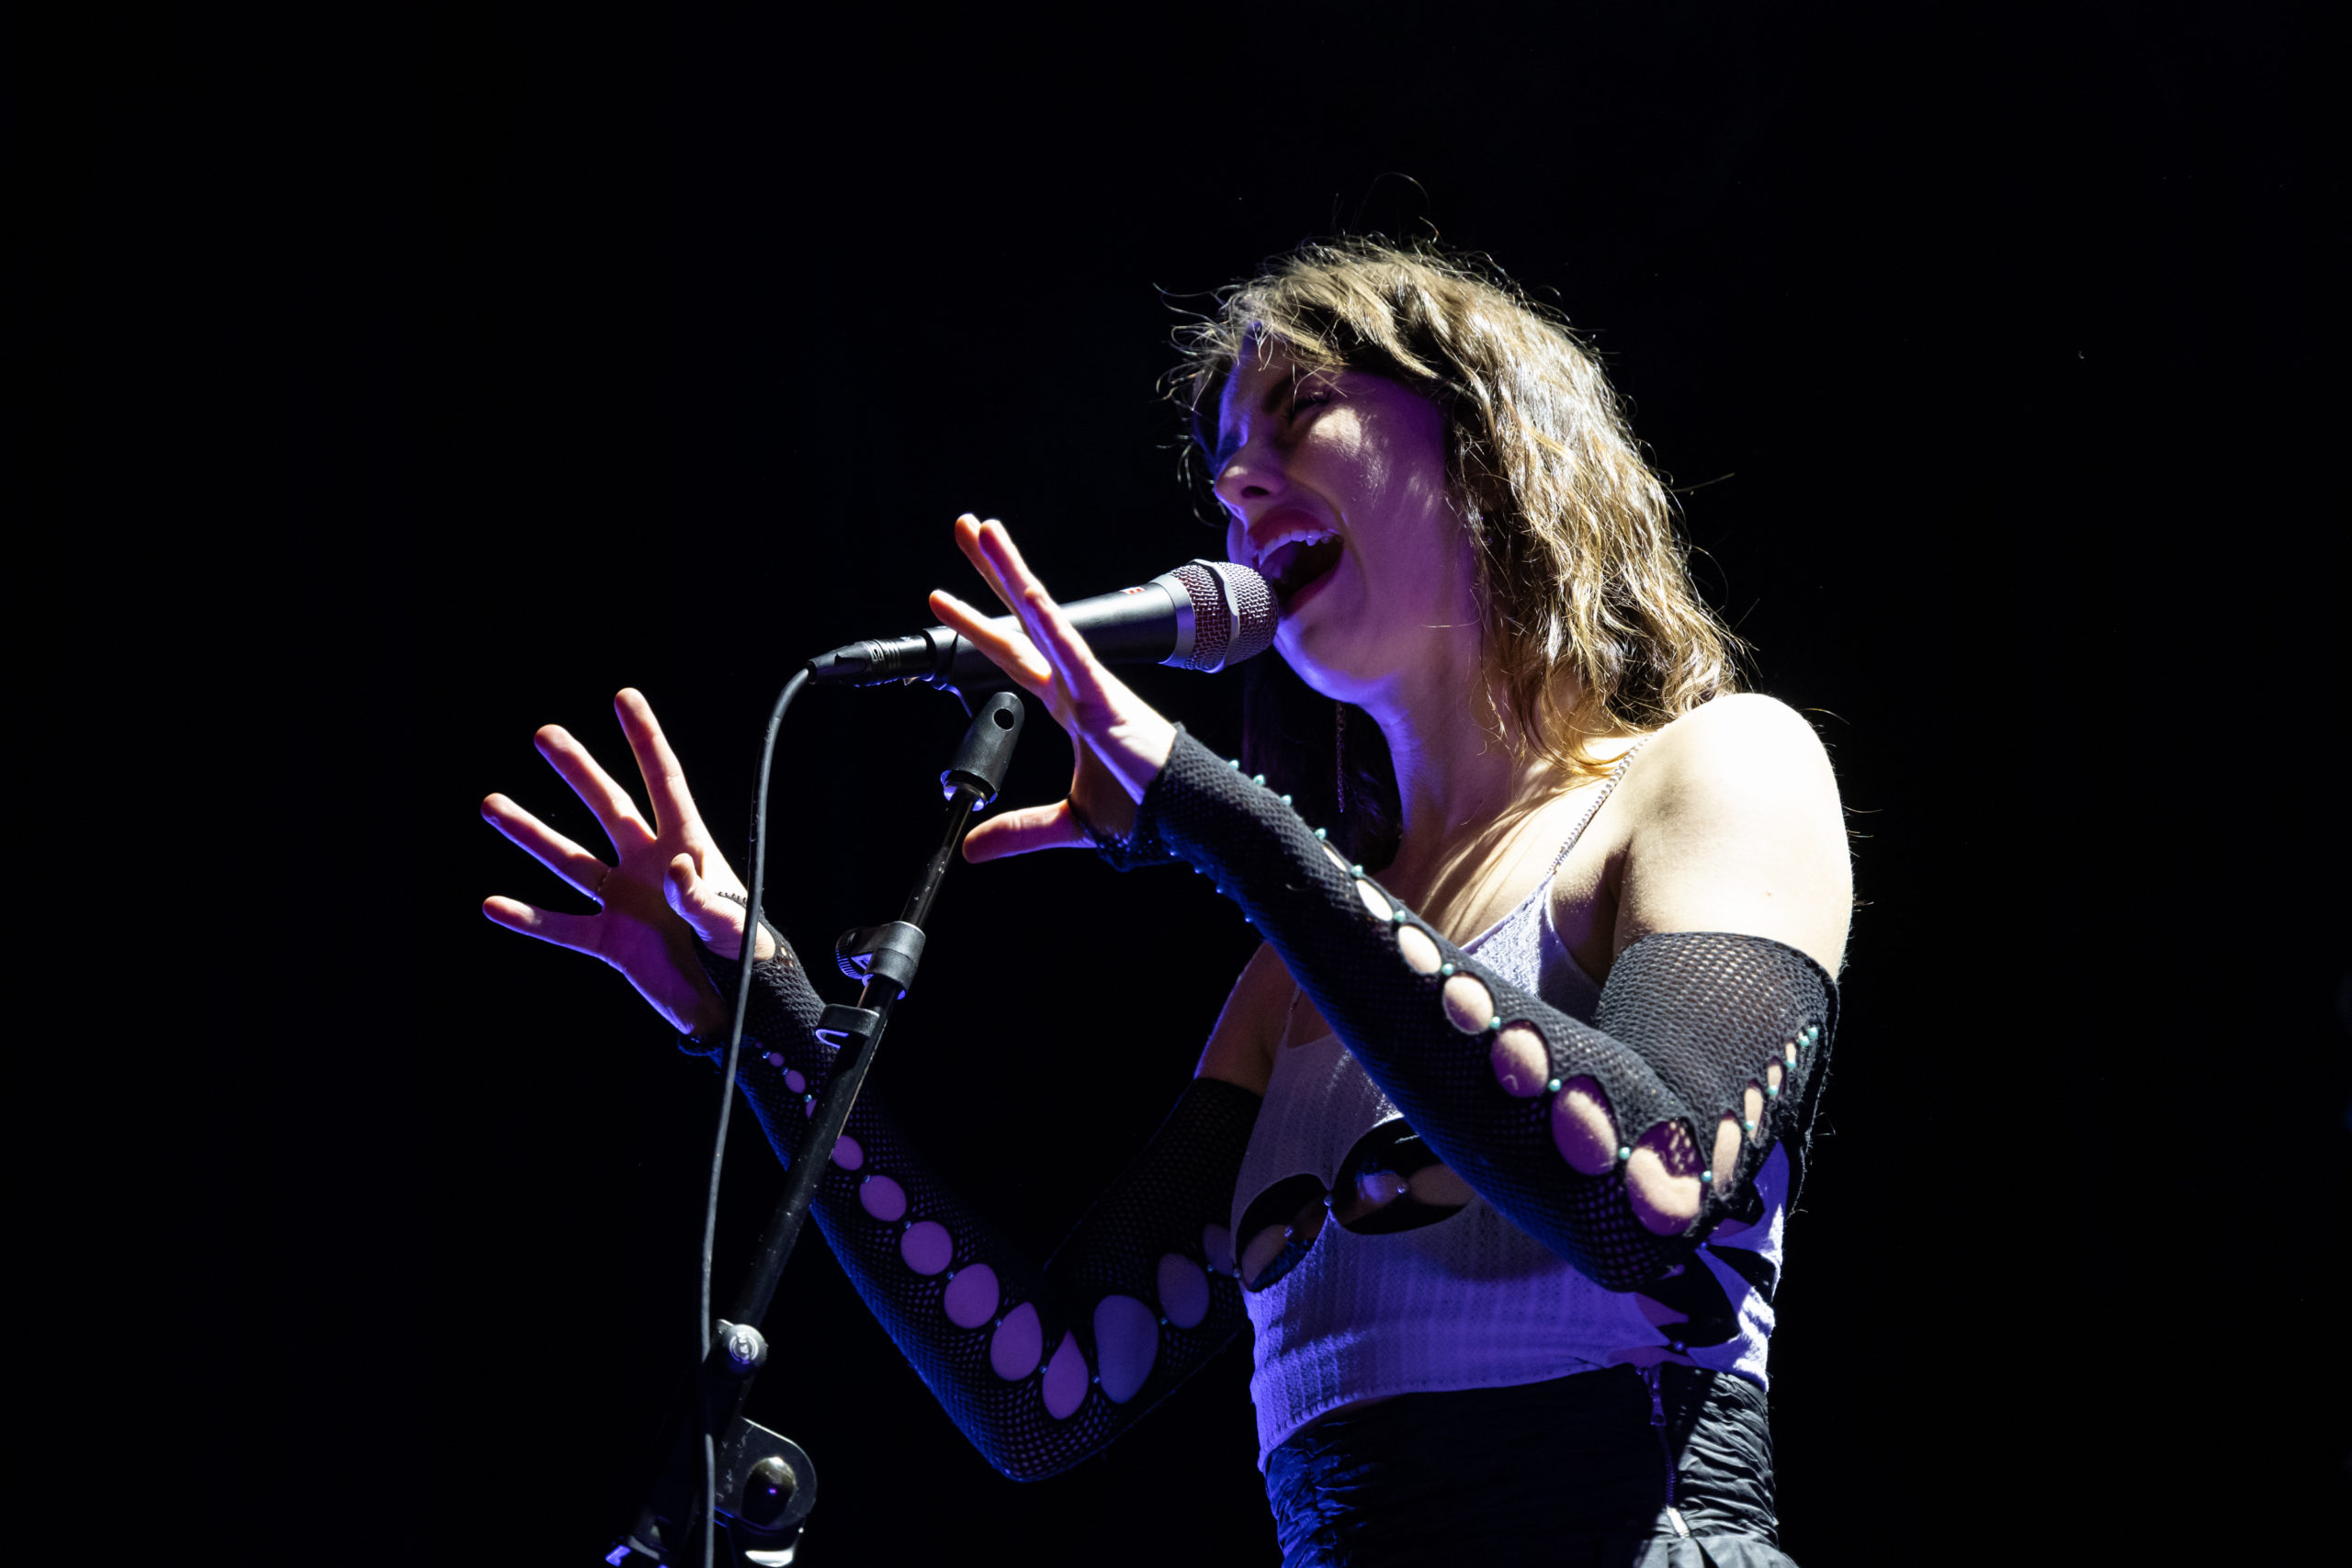 Kimbra sings dramatically into a microphone her hands up in front of her.